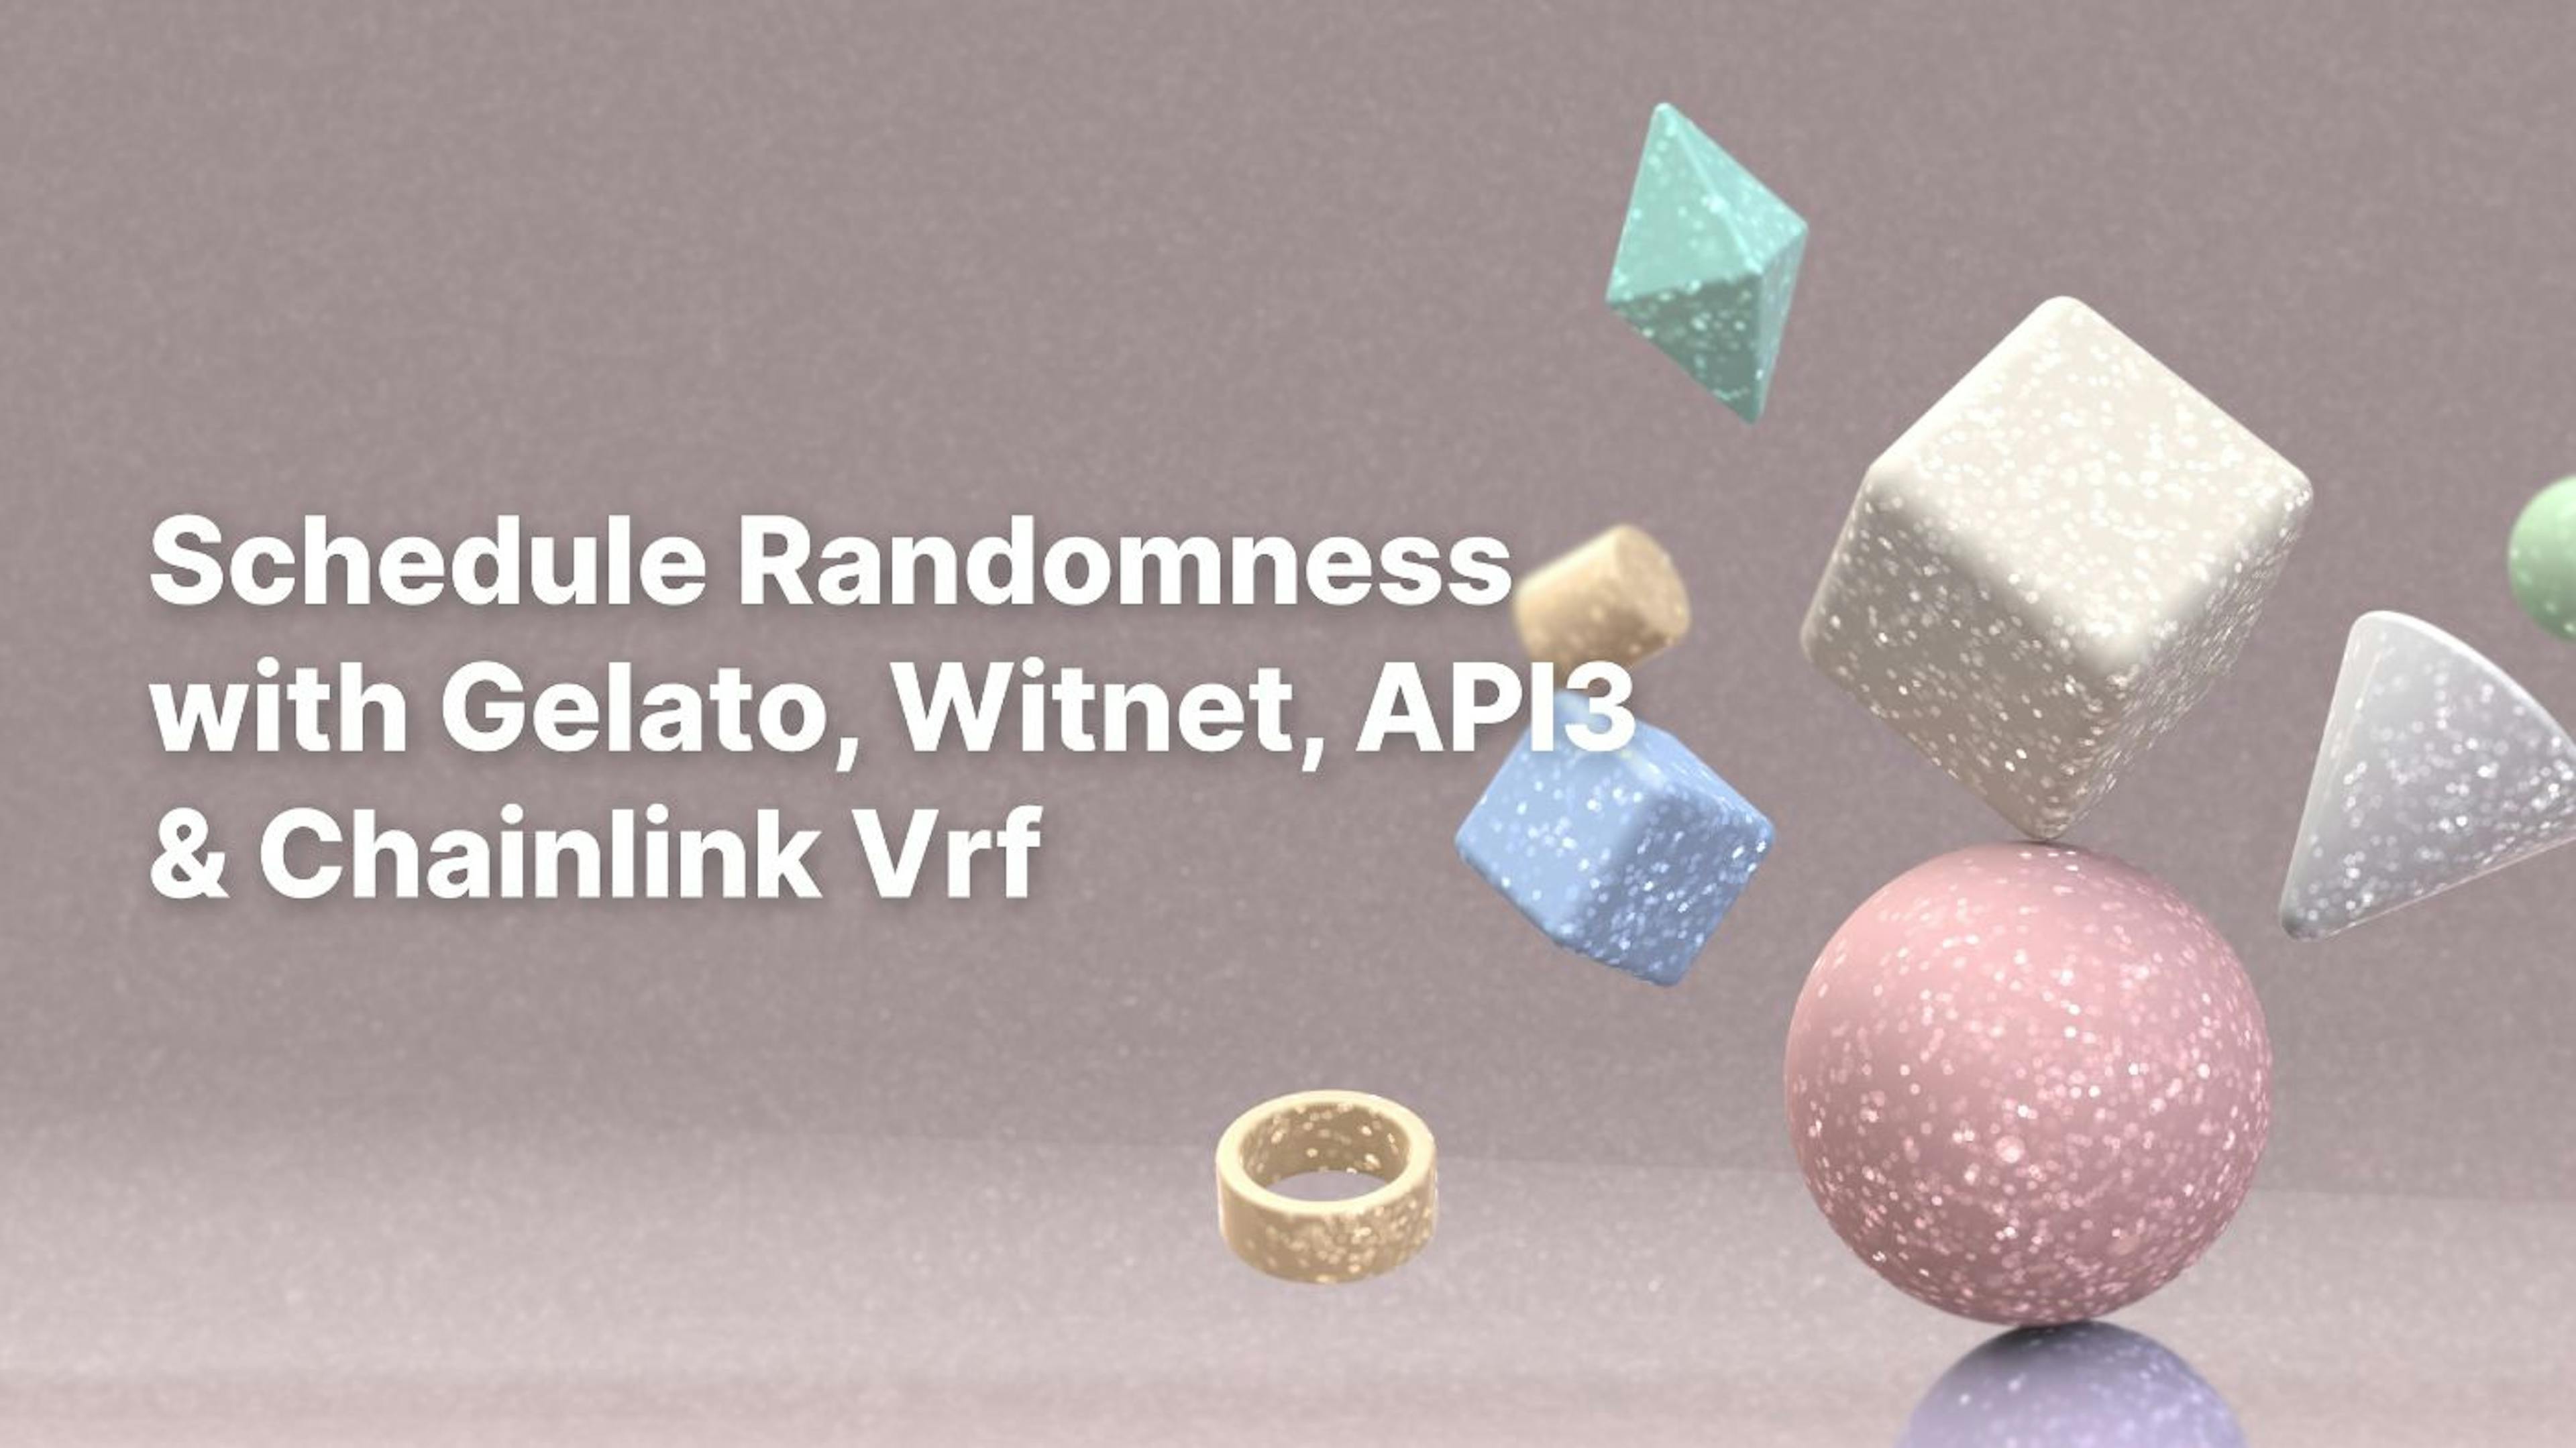 /using-gelato-witnet-api3-and-chainlink-vrf-to-schedule-randomness feature image